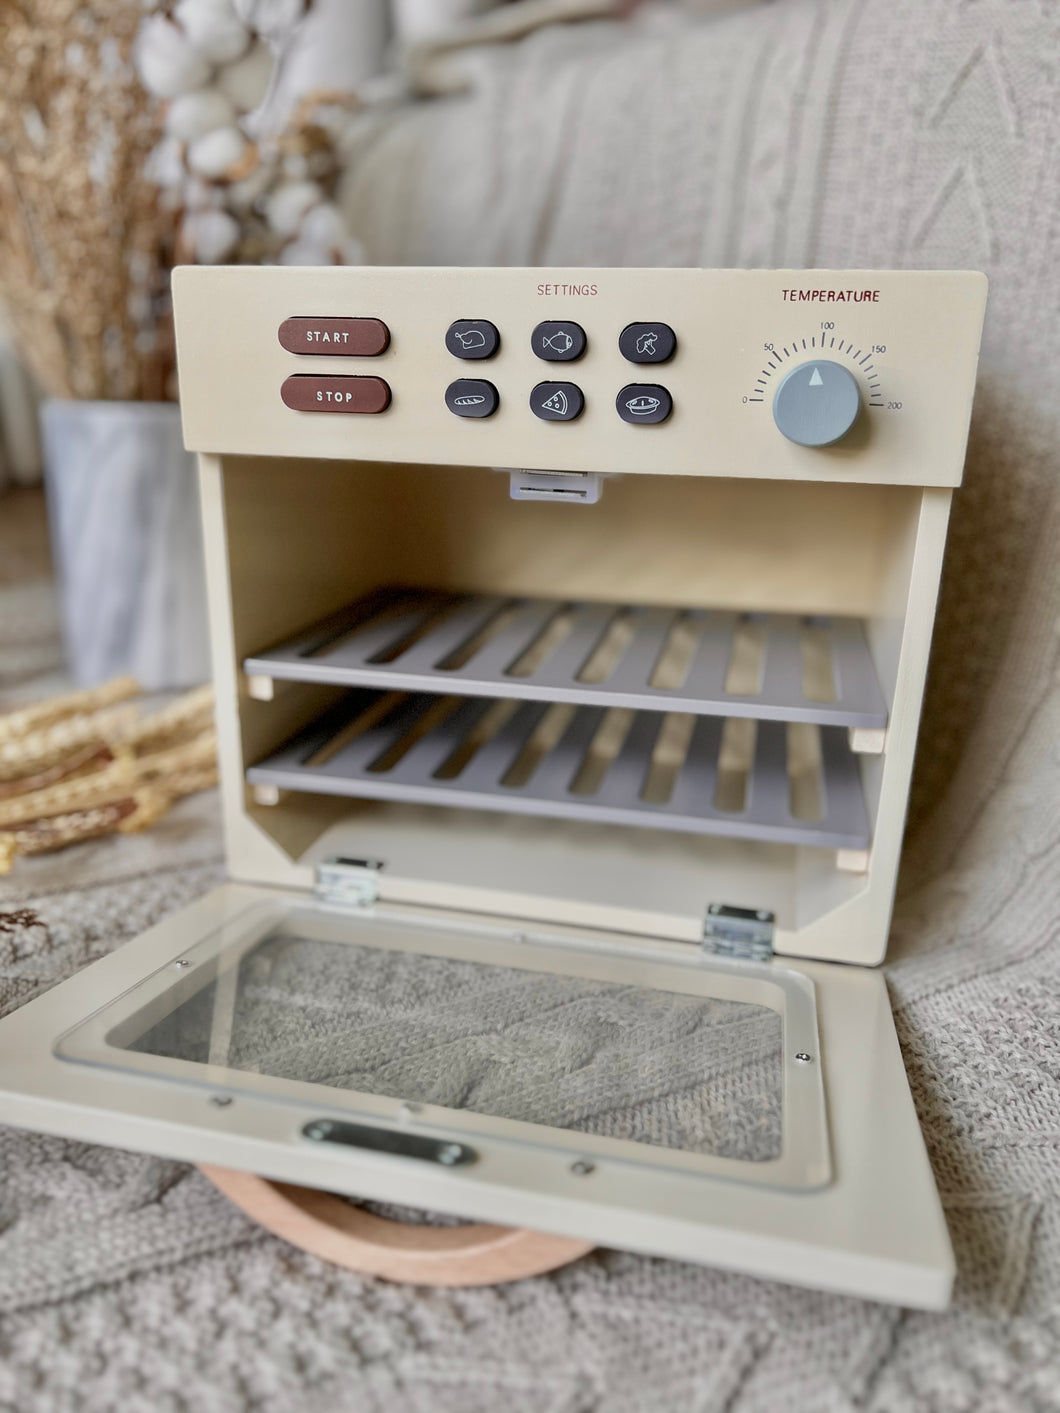 Toy Oven